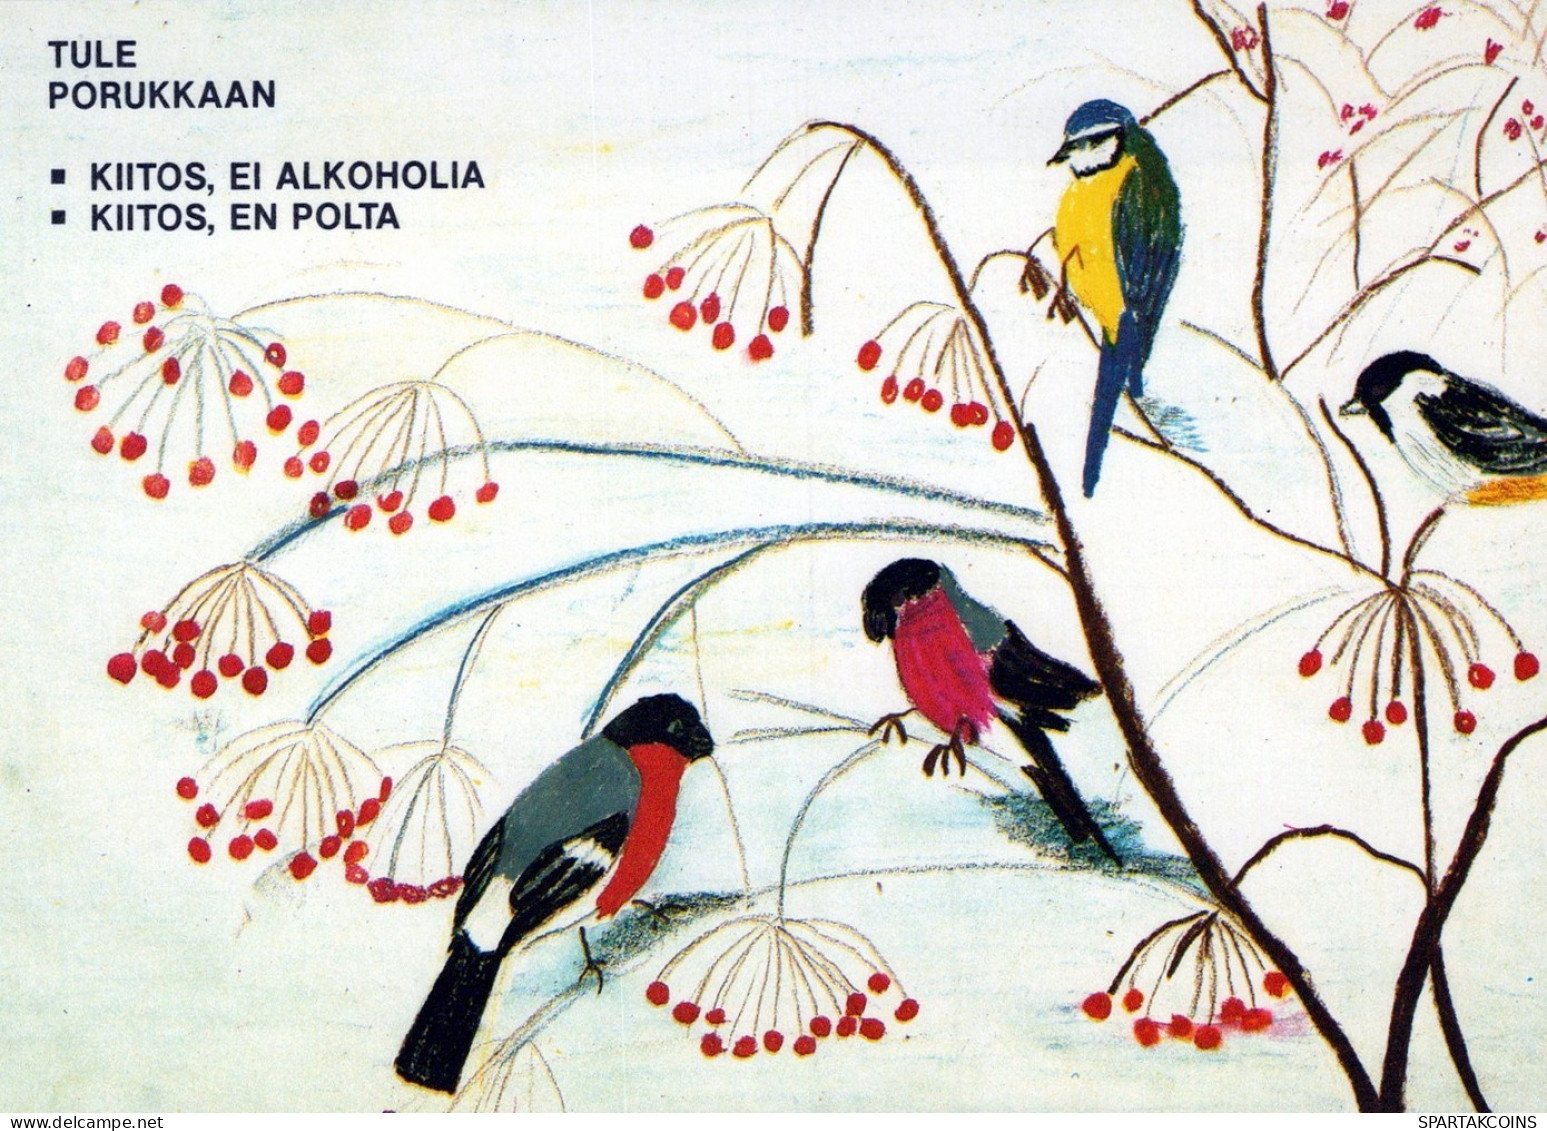 UCCELLO Animale Vintage Cartolina CPSM #PAN229.IT - Birds